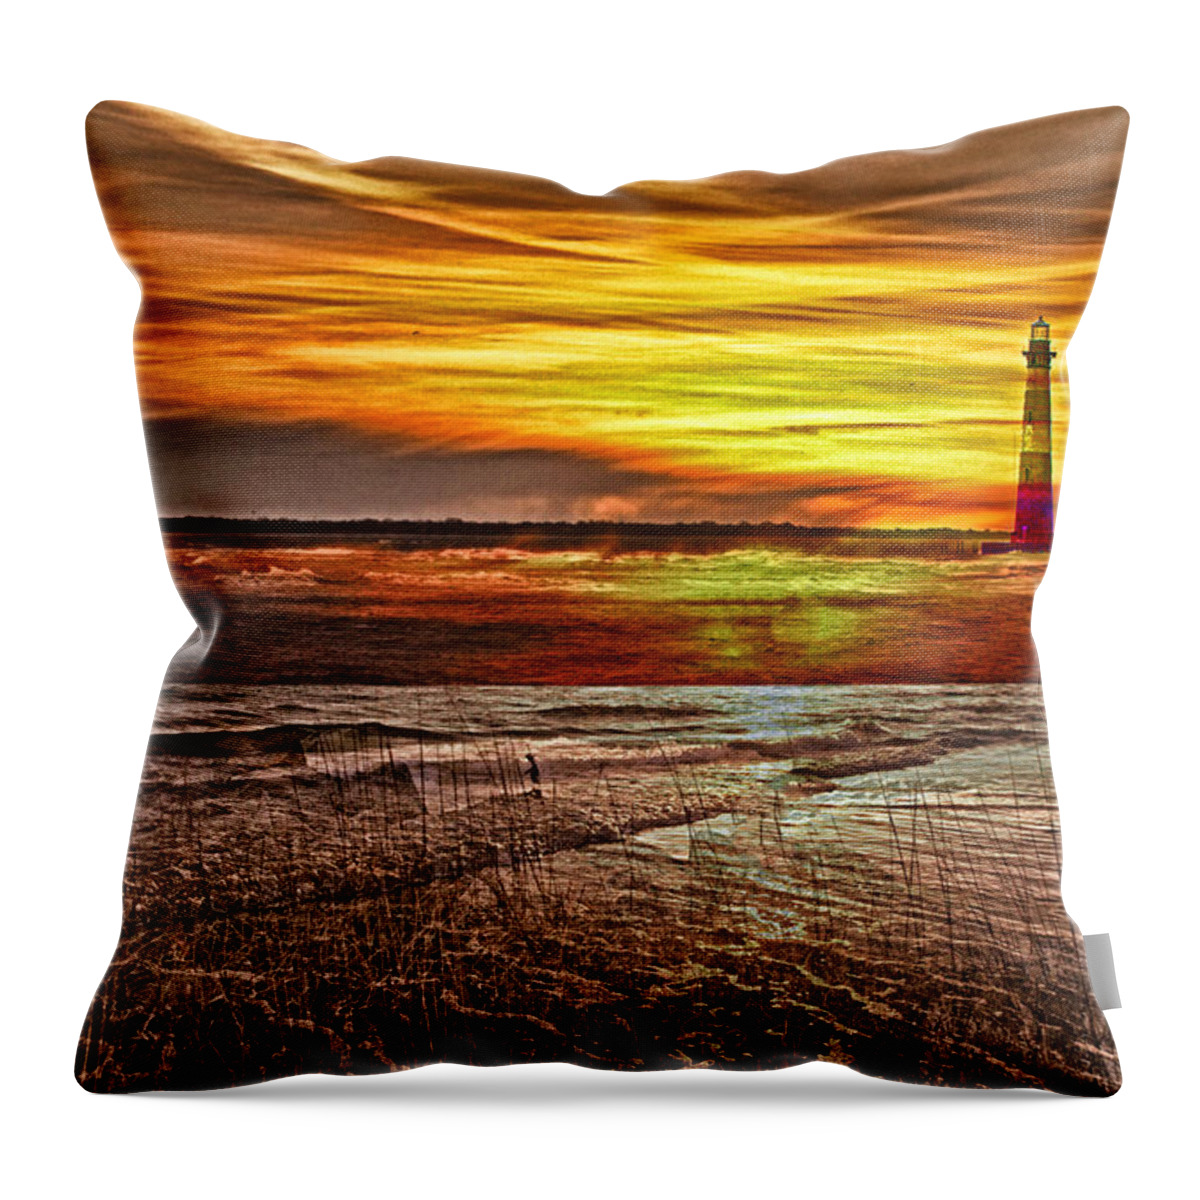 Lighthouse Throw Pillow featuring the photograph Morris Island Lighthouse Sunrise by Bill Barber